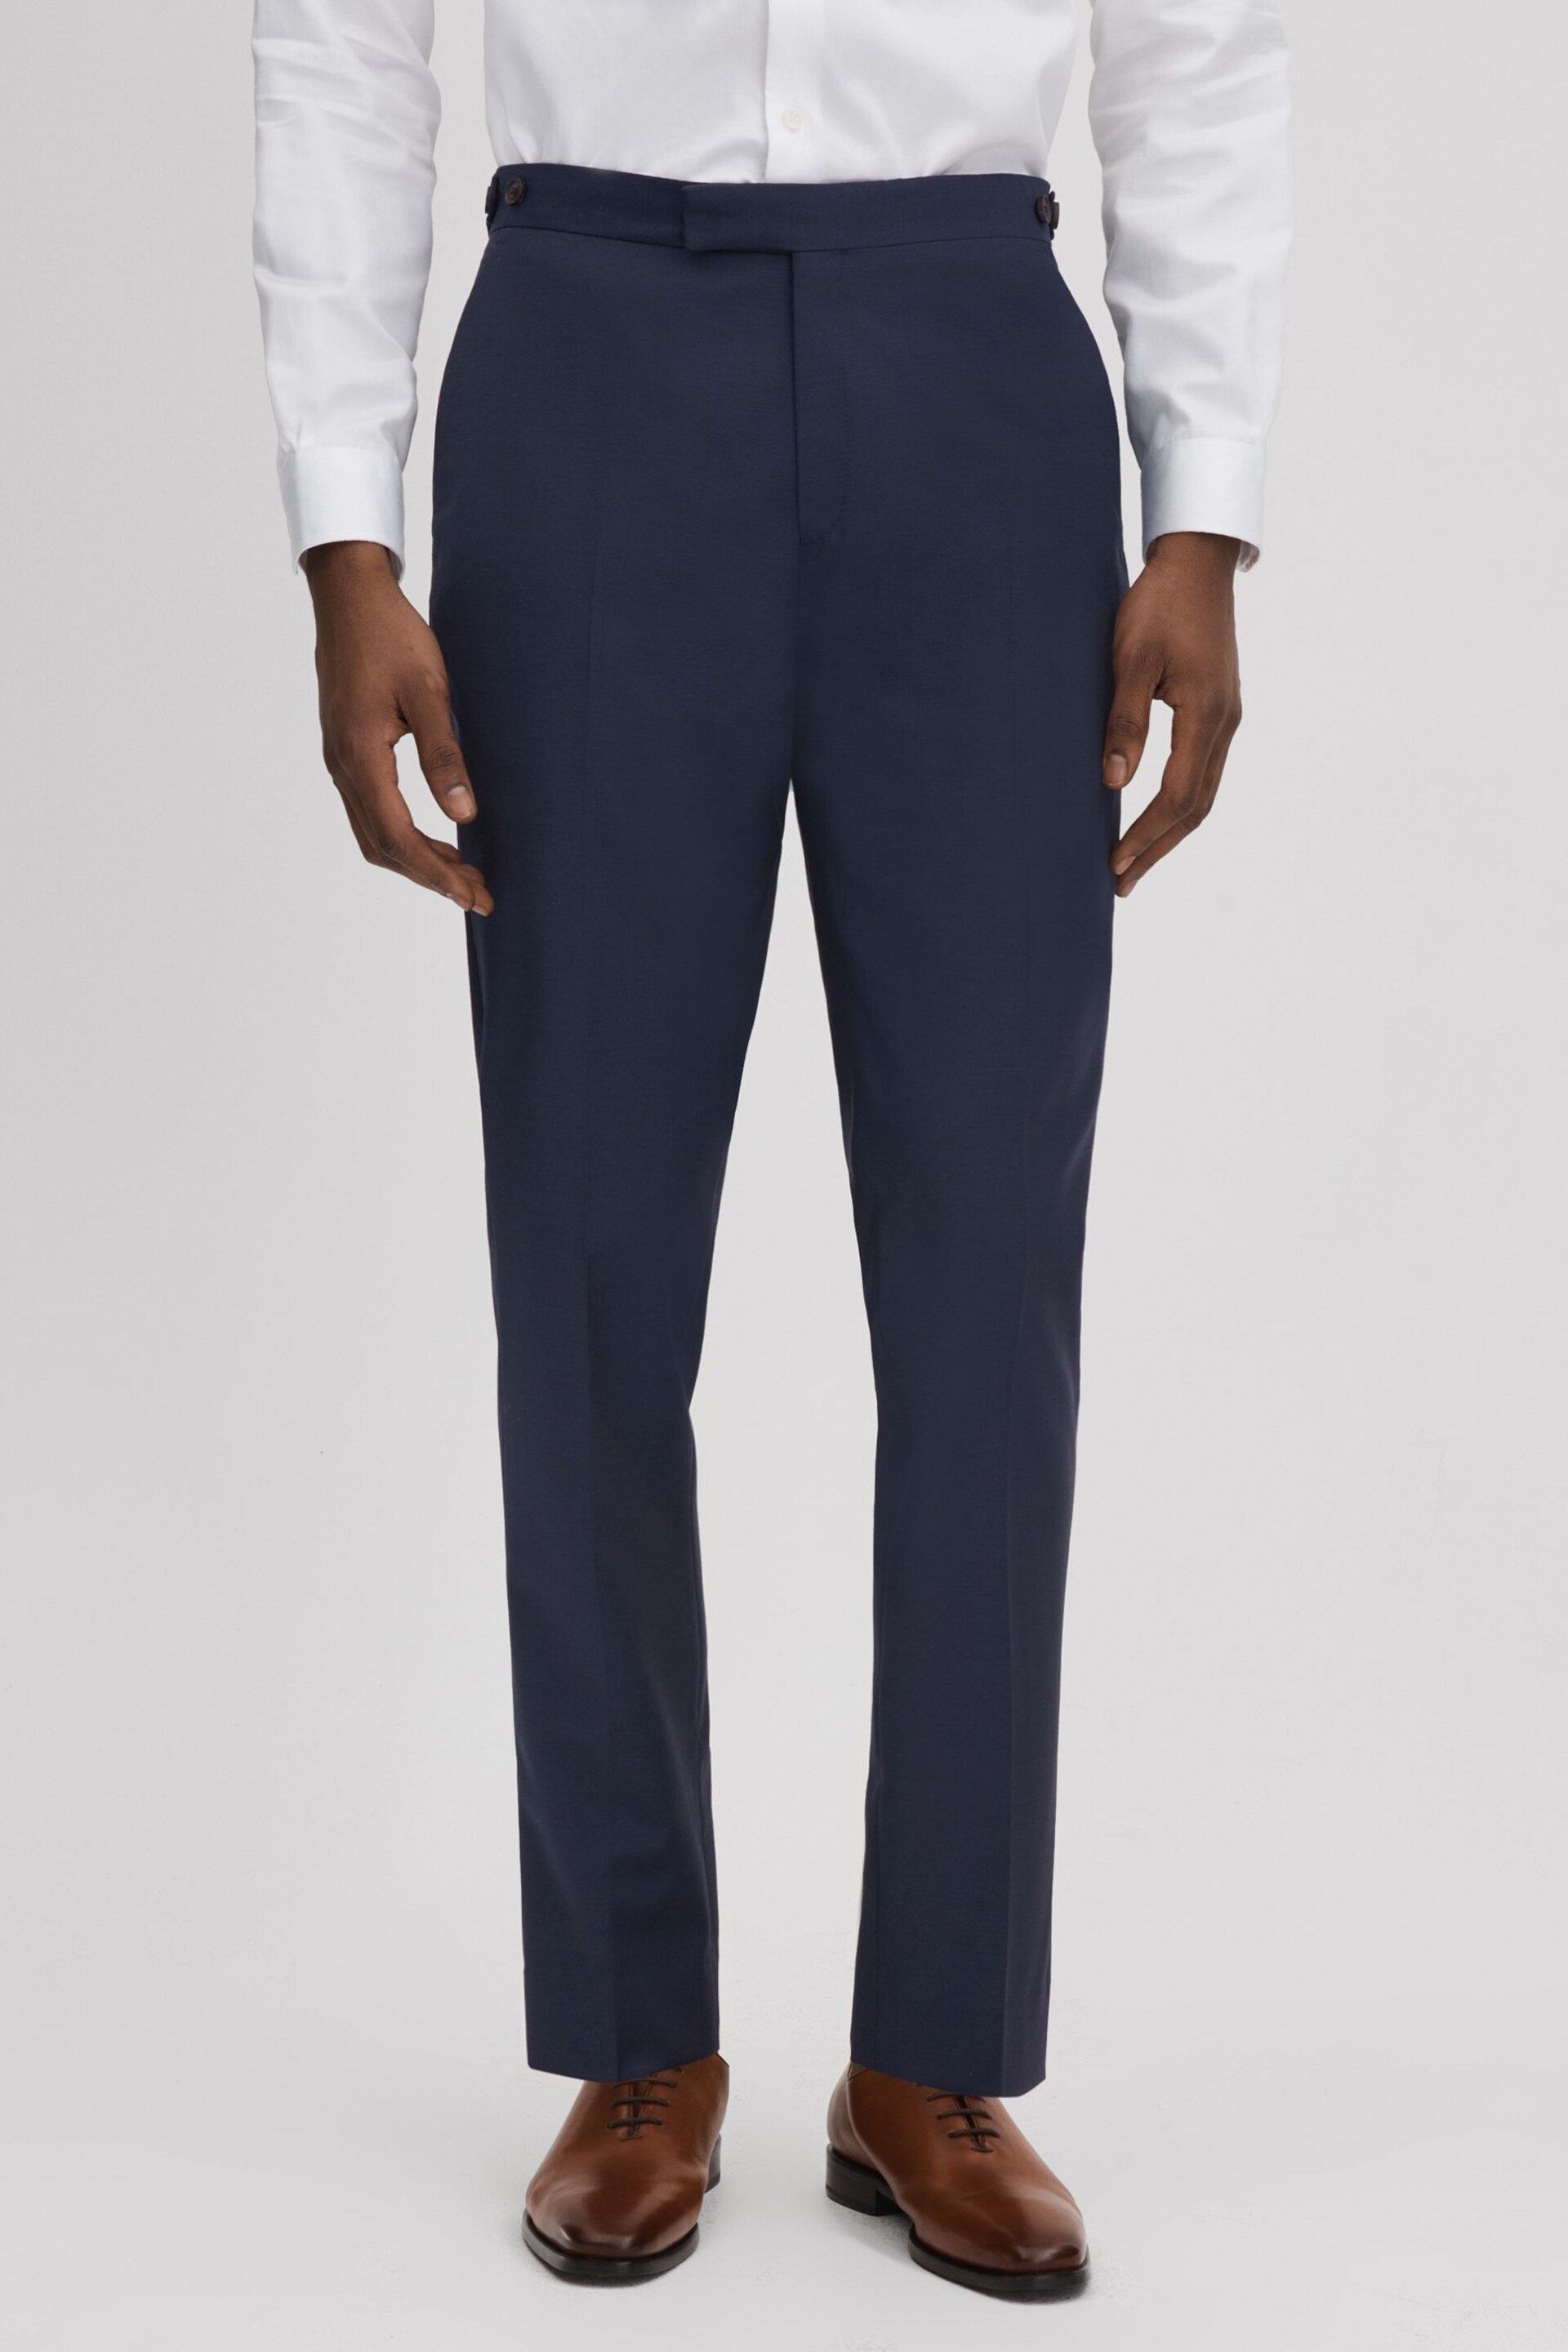 Reiss Navy Destiny Wool Side Adjuster Trousers - Image 1 of 5